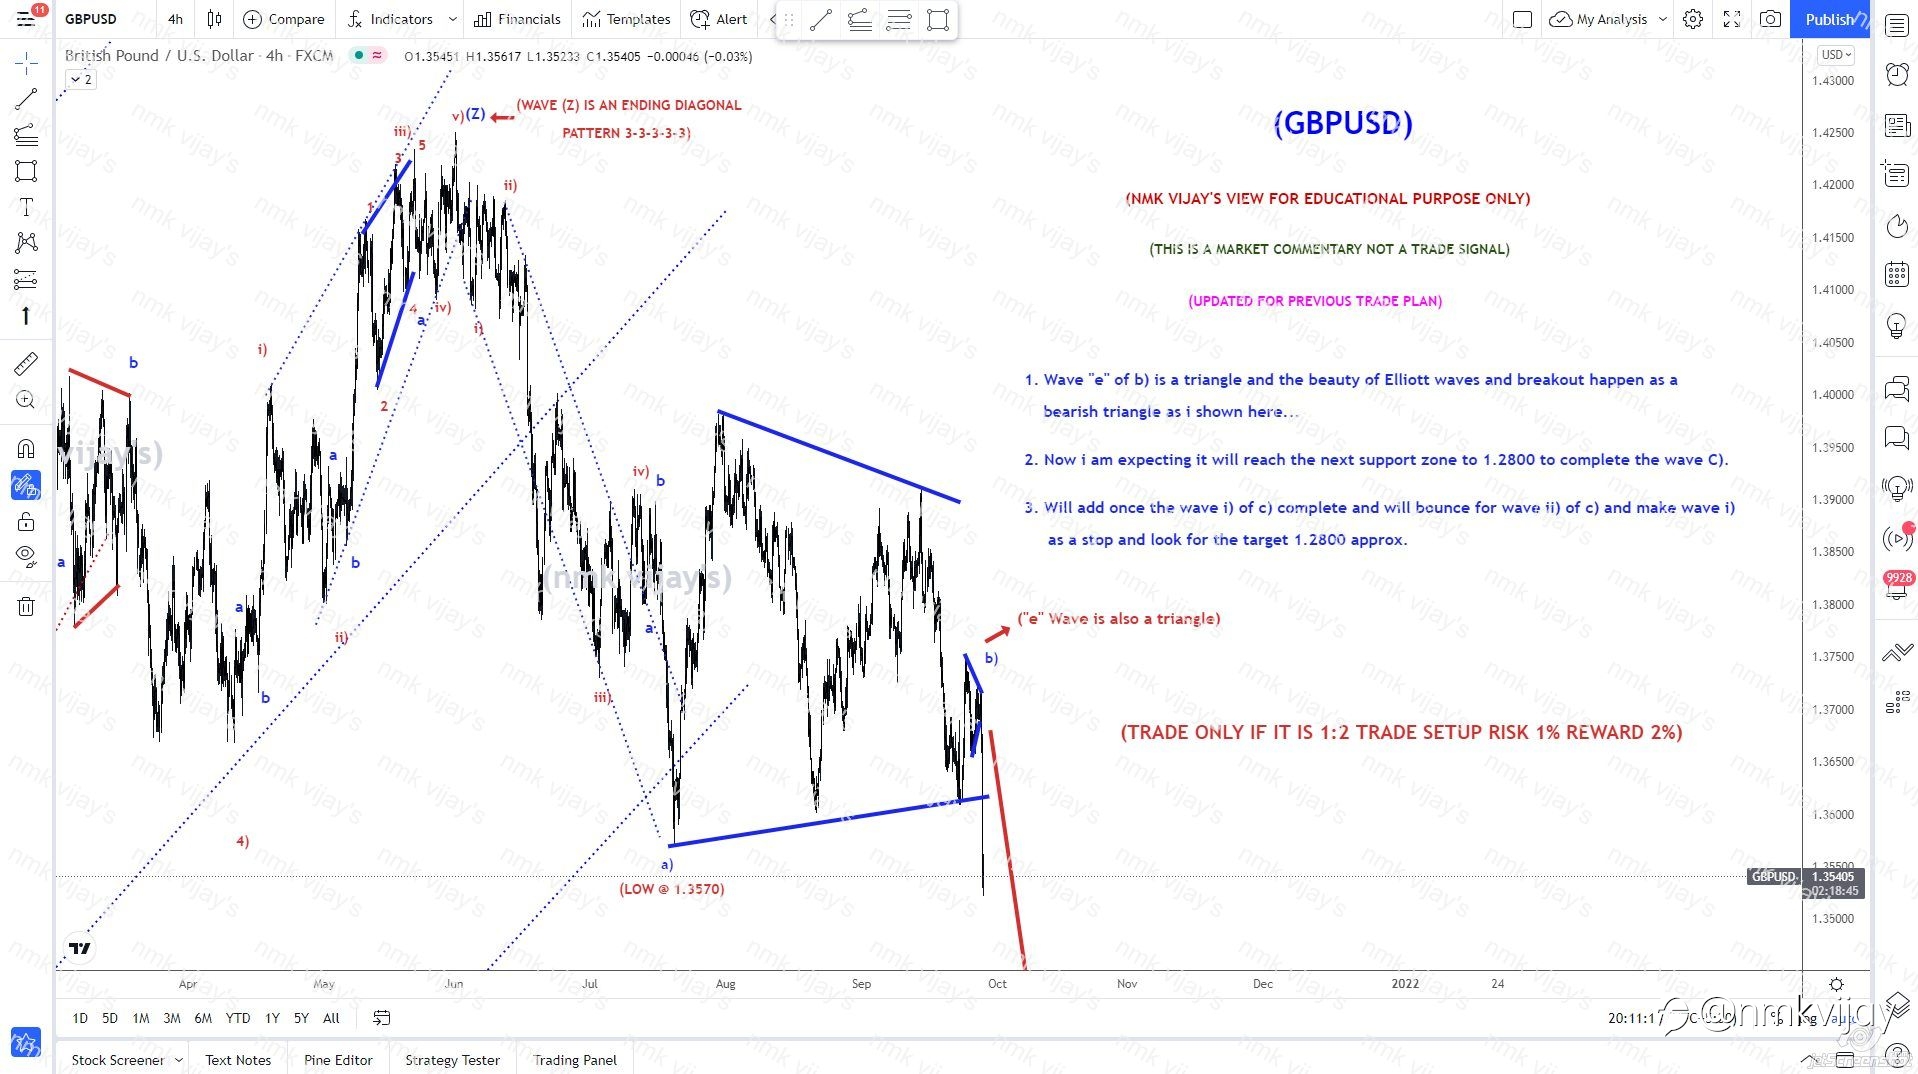 GBPUSD-Wave e of b) is a Triangle, way to next support 1.2800